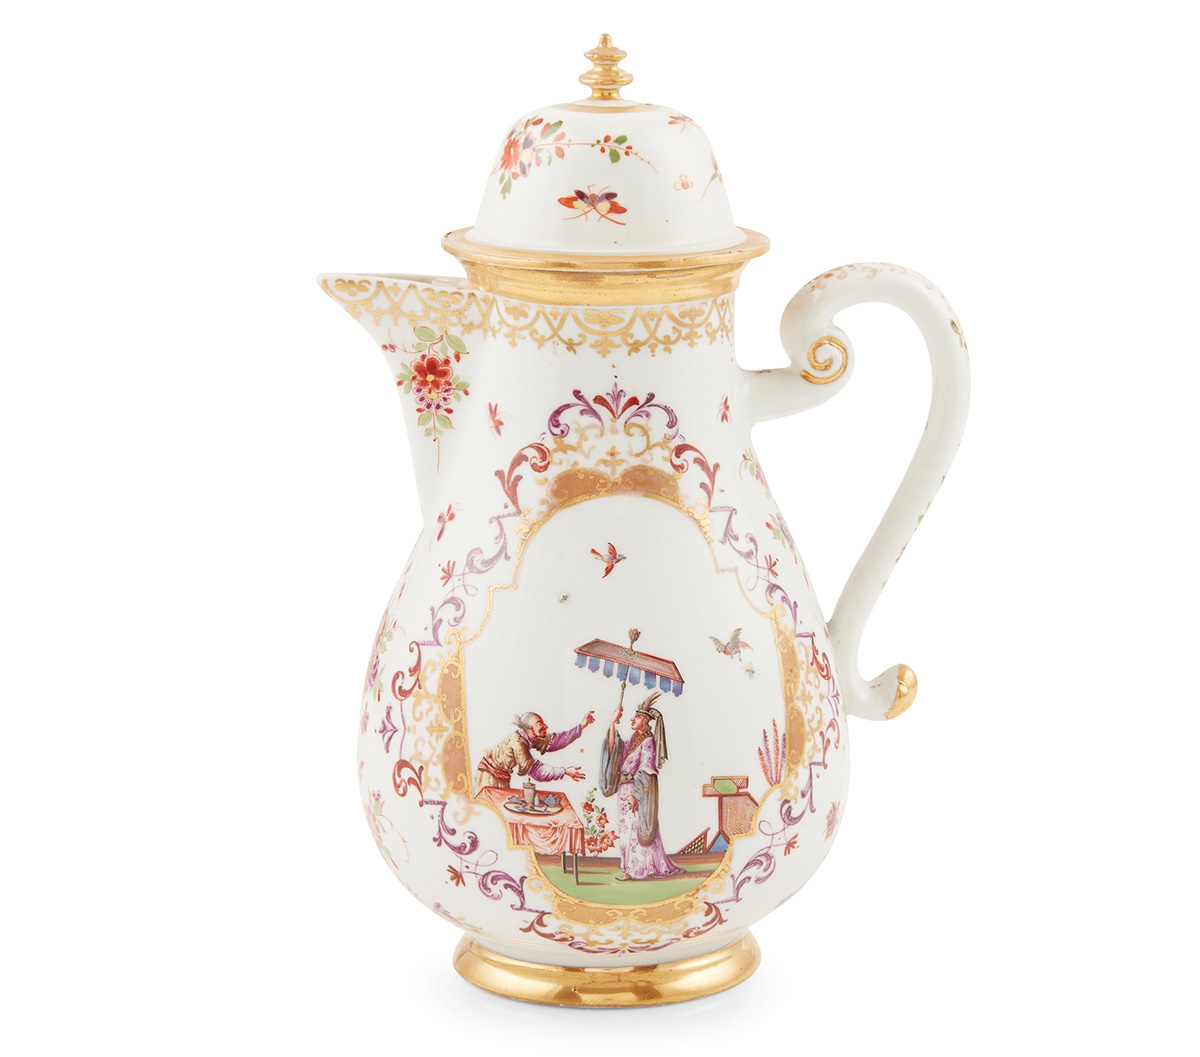 MEISSEN COFFEE POT AND COVER CIRCA 1725-30